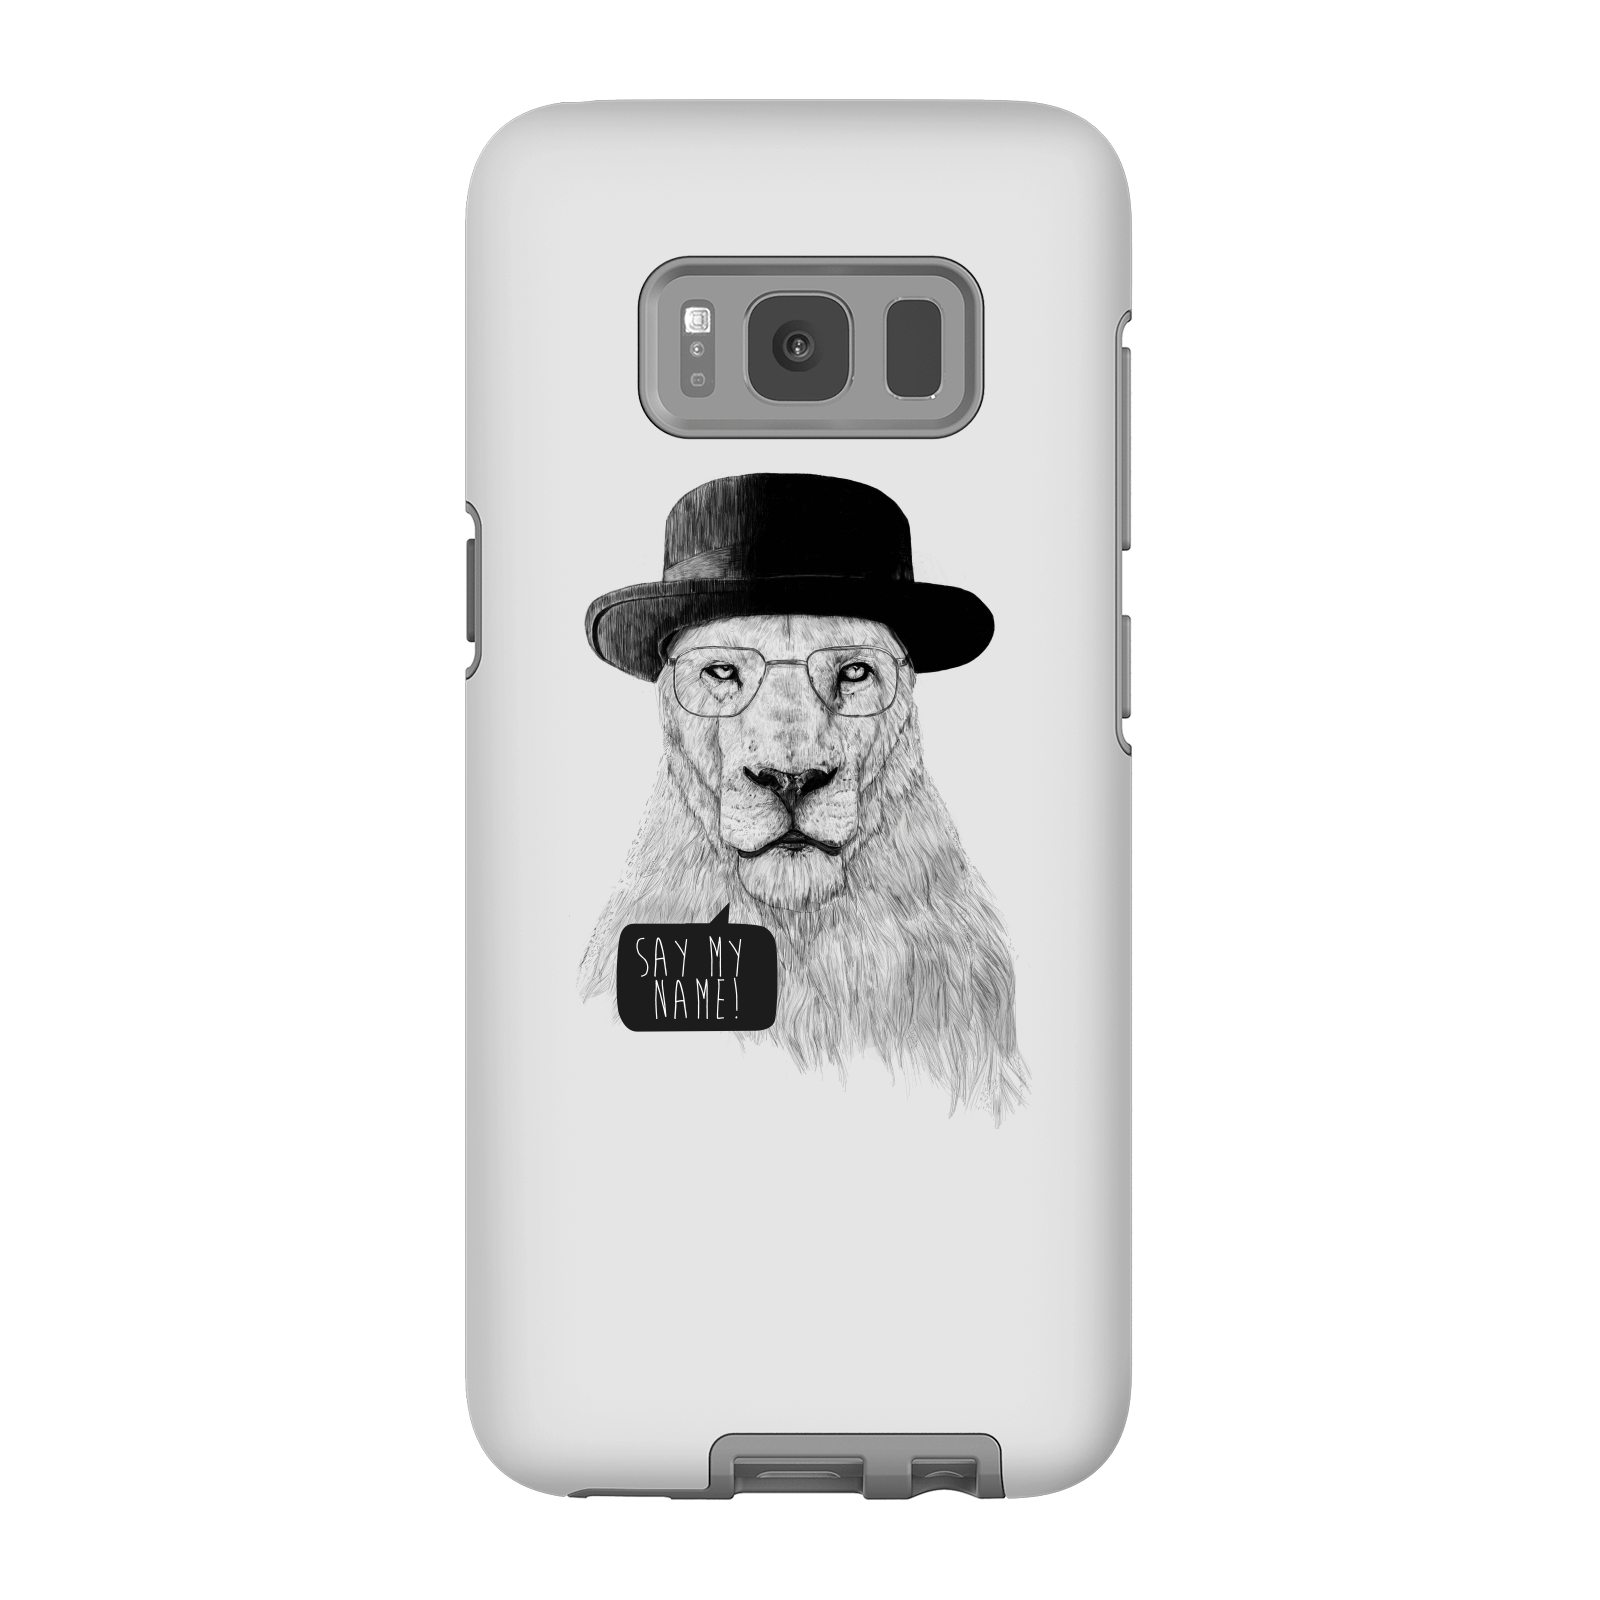 balazs solti say my name phone case for iphone and android - samsung s8 - tough case - gloss